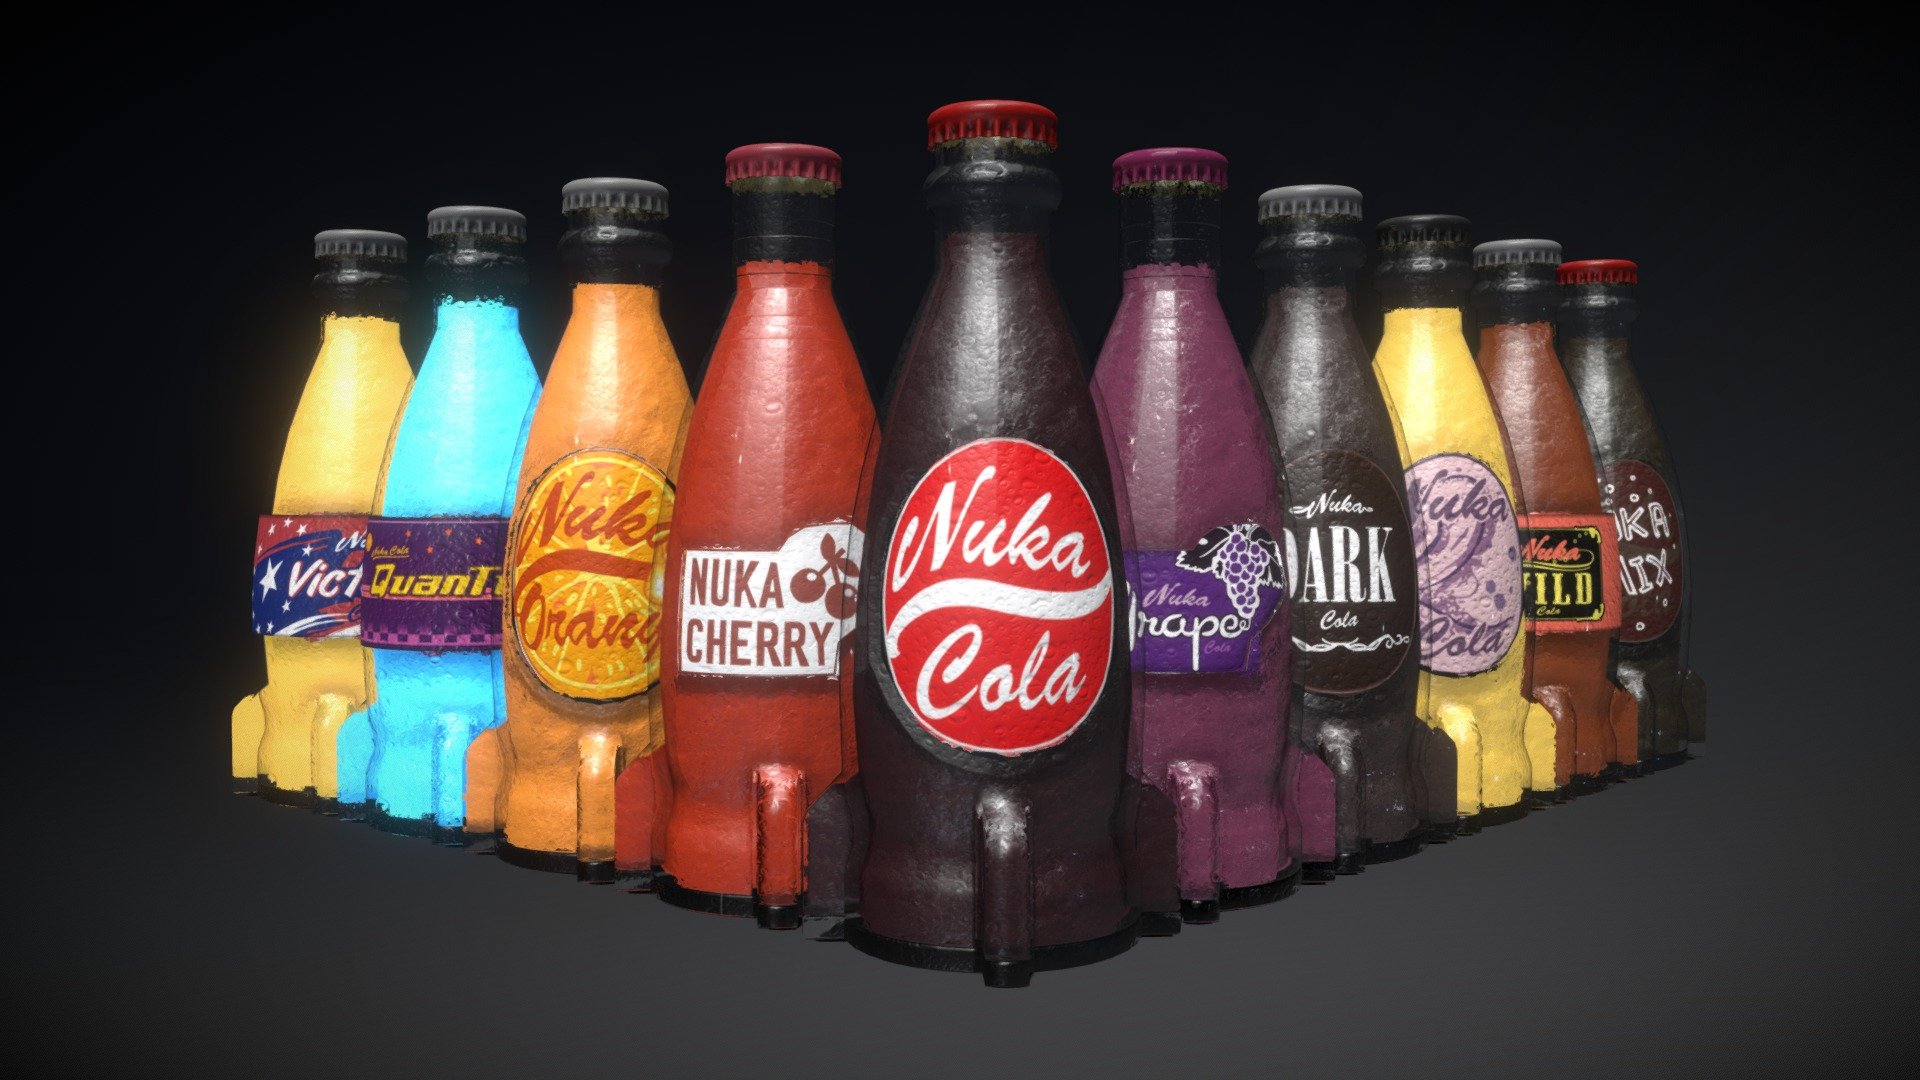 Nuka-Cola: All Flavours (Fallout 4) - 3D model by Angel Cormier  (@angelcormier) [e31d8dd]